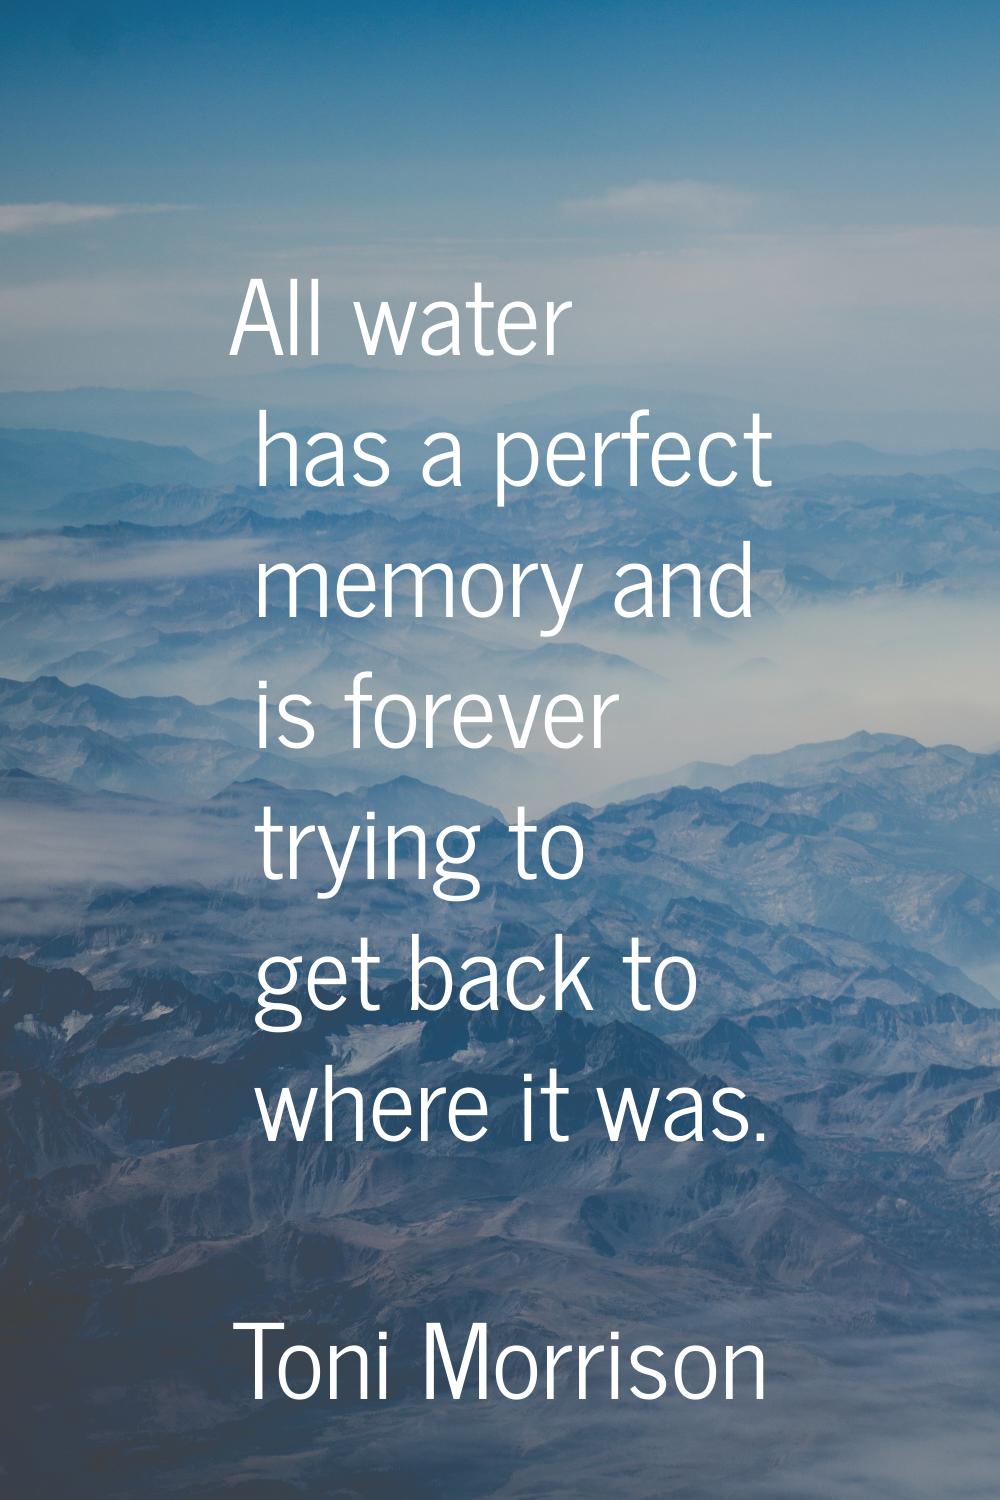 All water has a perfect memory and is forever trying to get back to where it was.